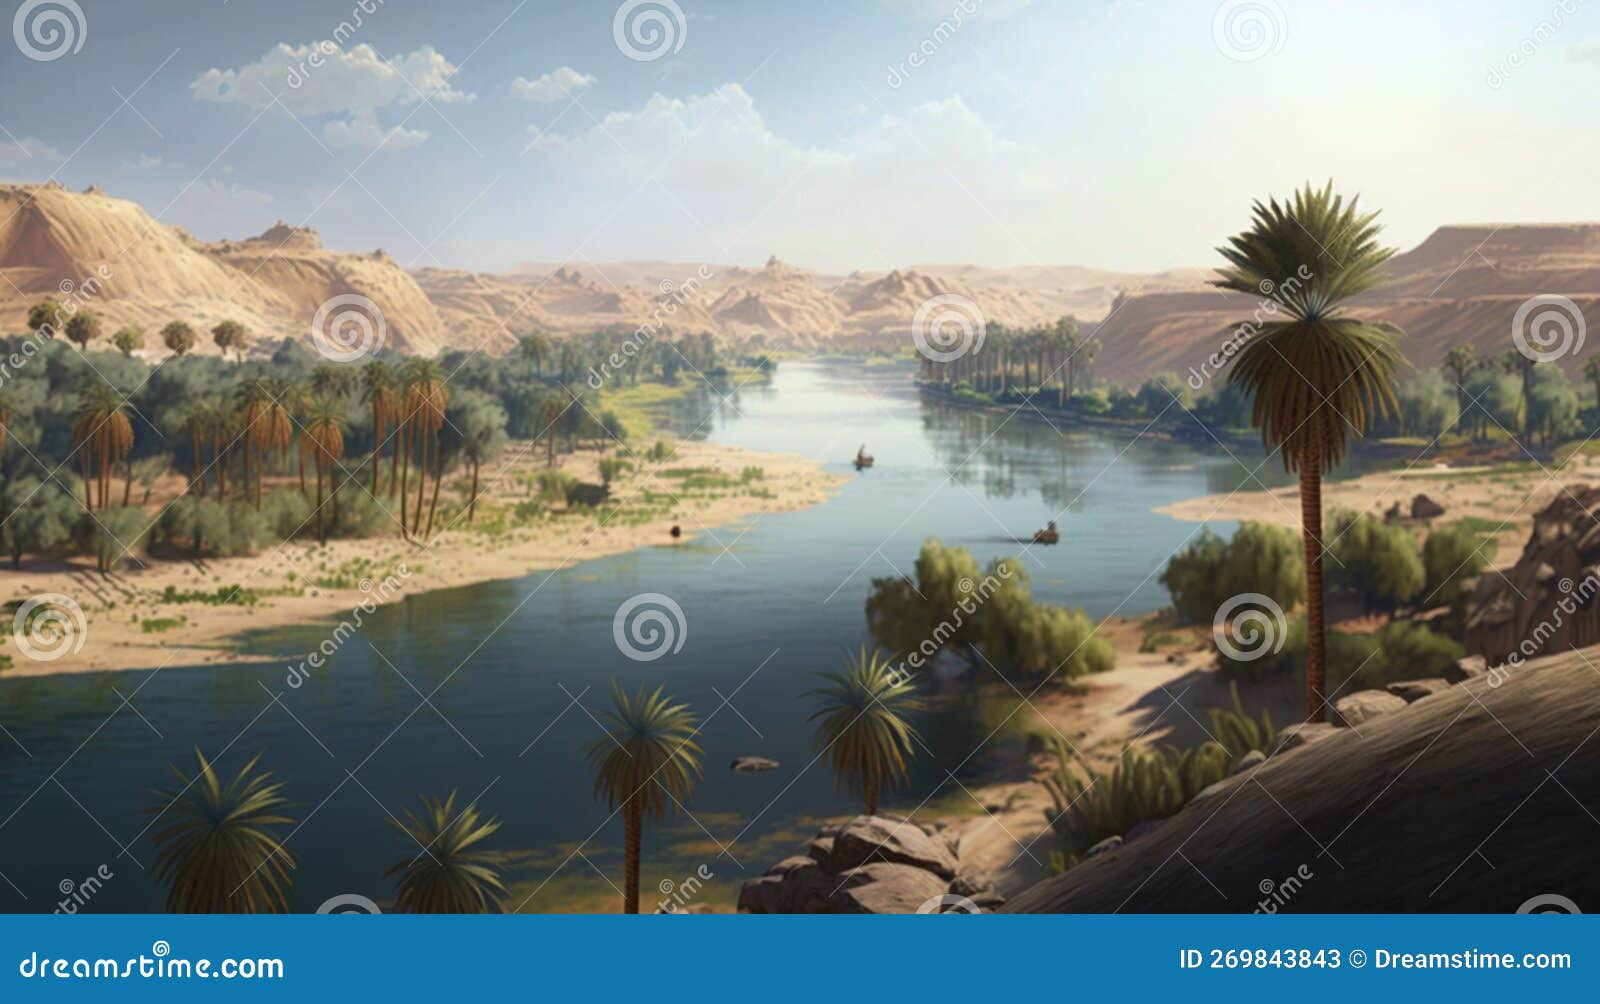 The Nile River: Map, History, Facts, Location, Source - Egypt Tours Portal  | Nile river ancient egypt, Nile, Nile river